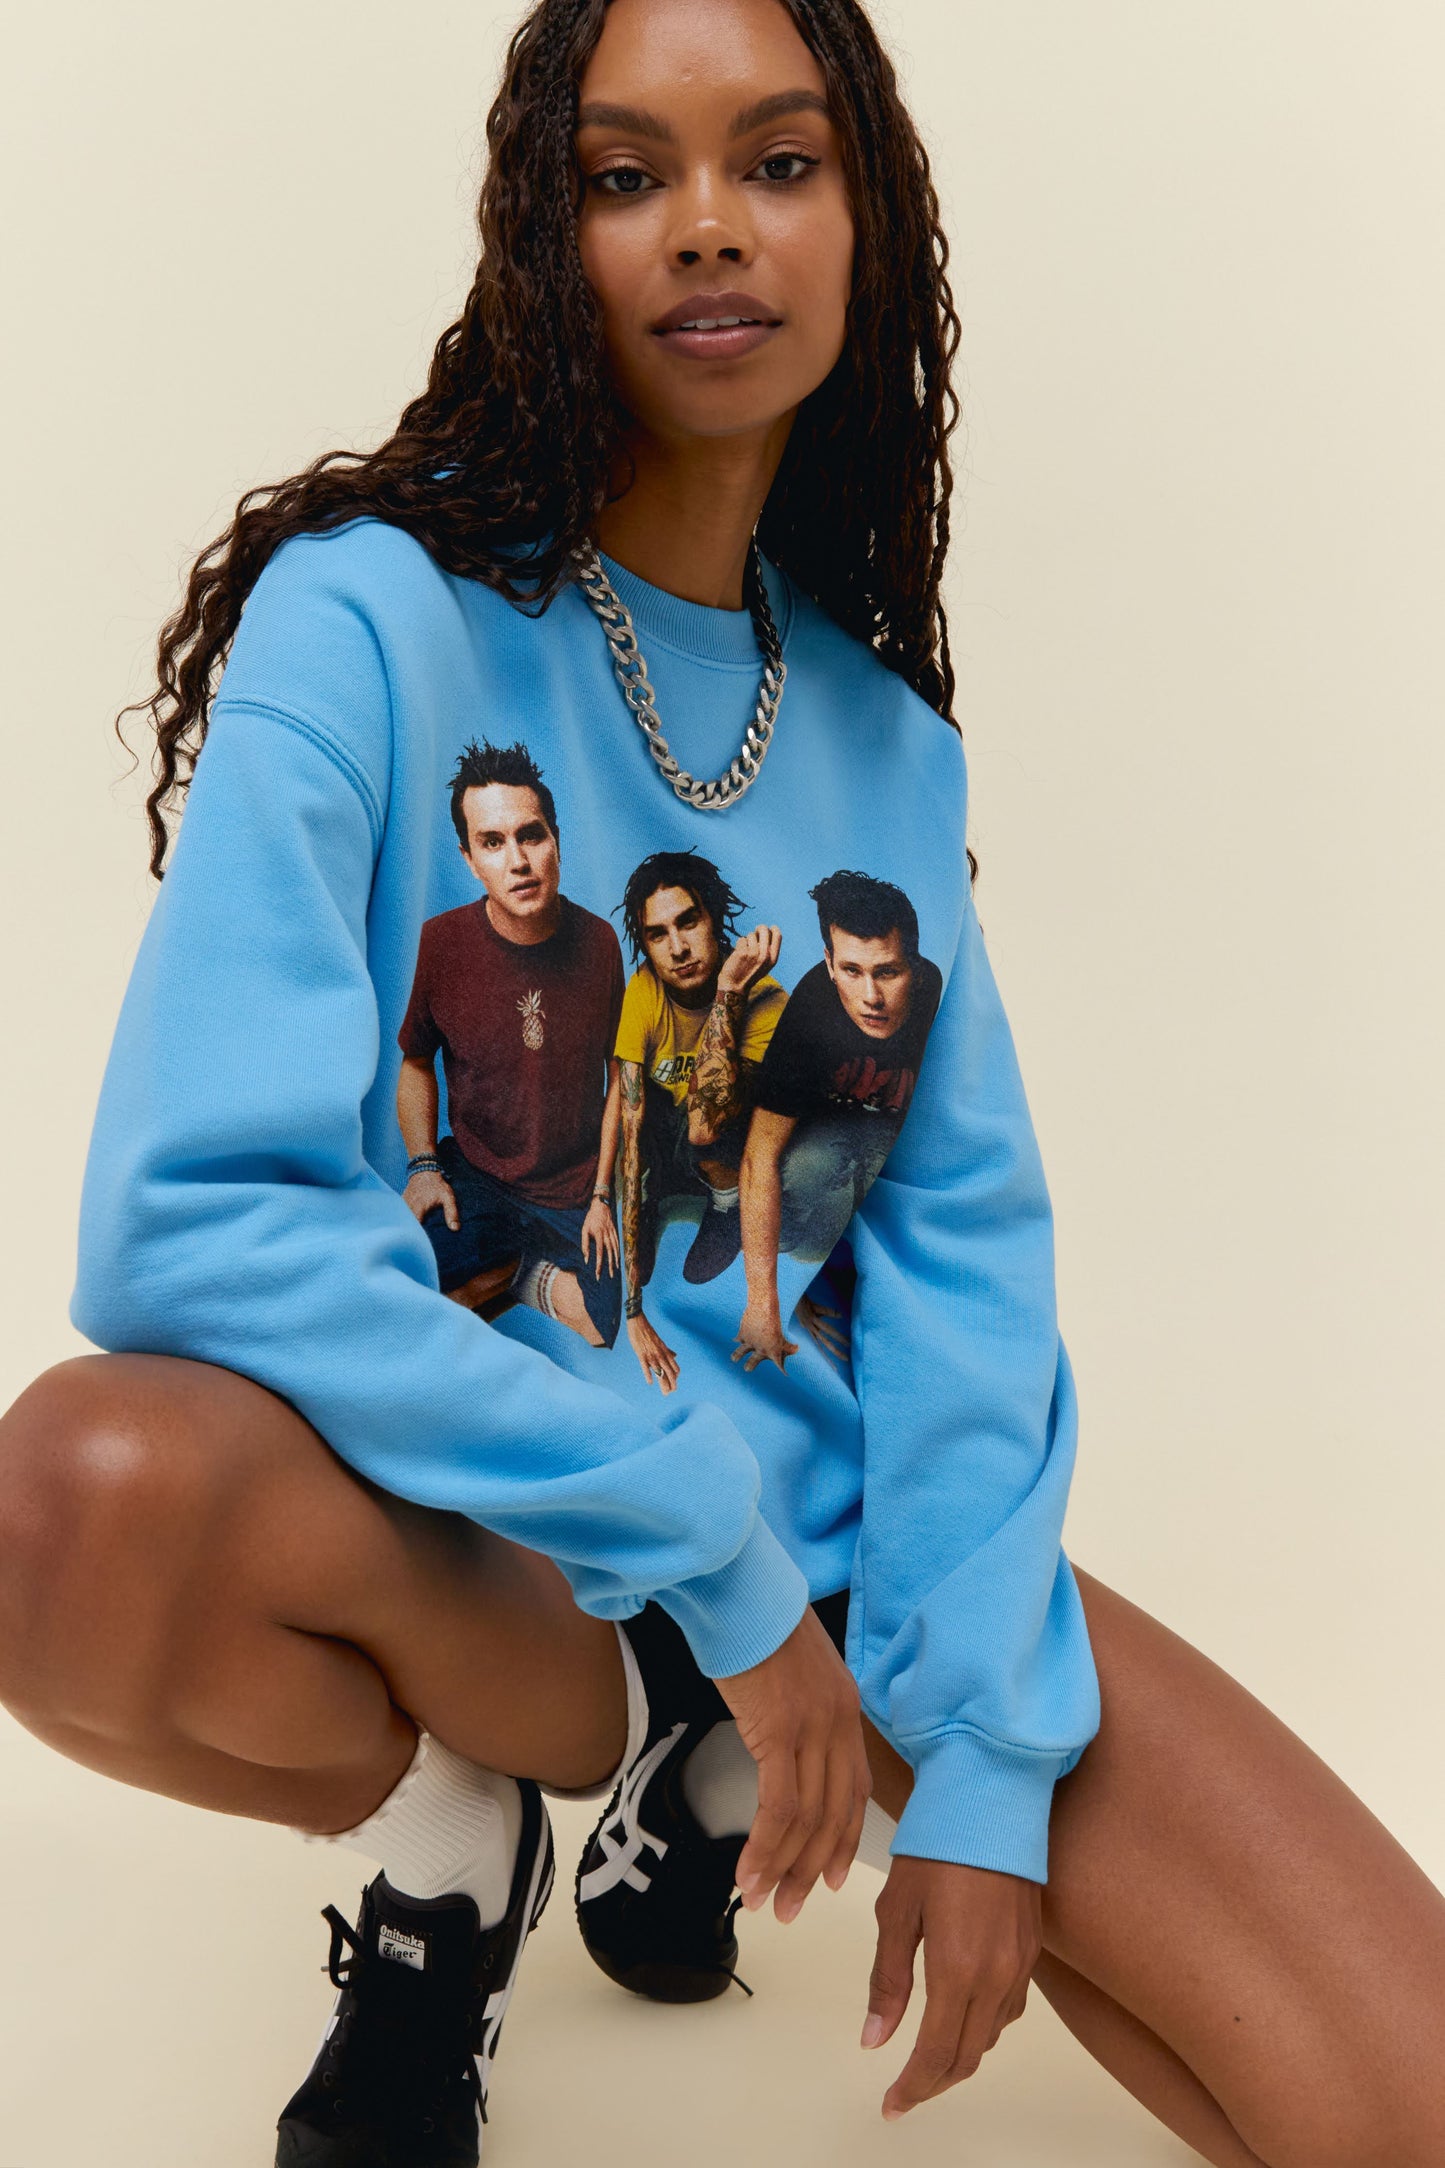 Model wearing a Blink 182 graphic sweatshirt in blue featuring portrait artwork and logo on back